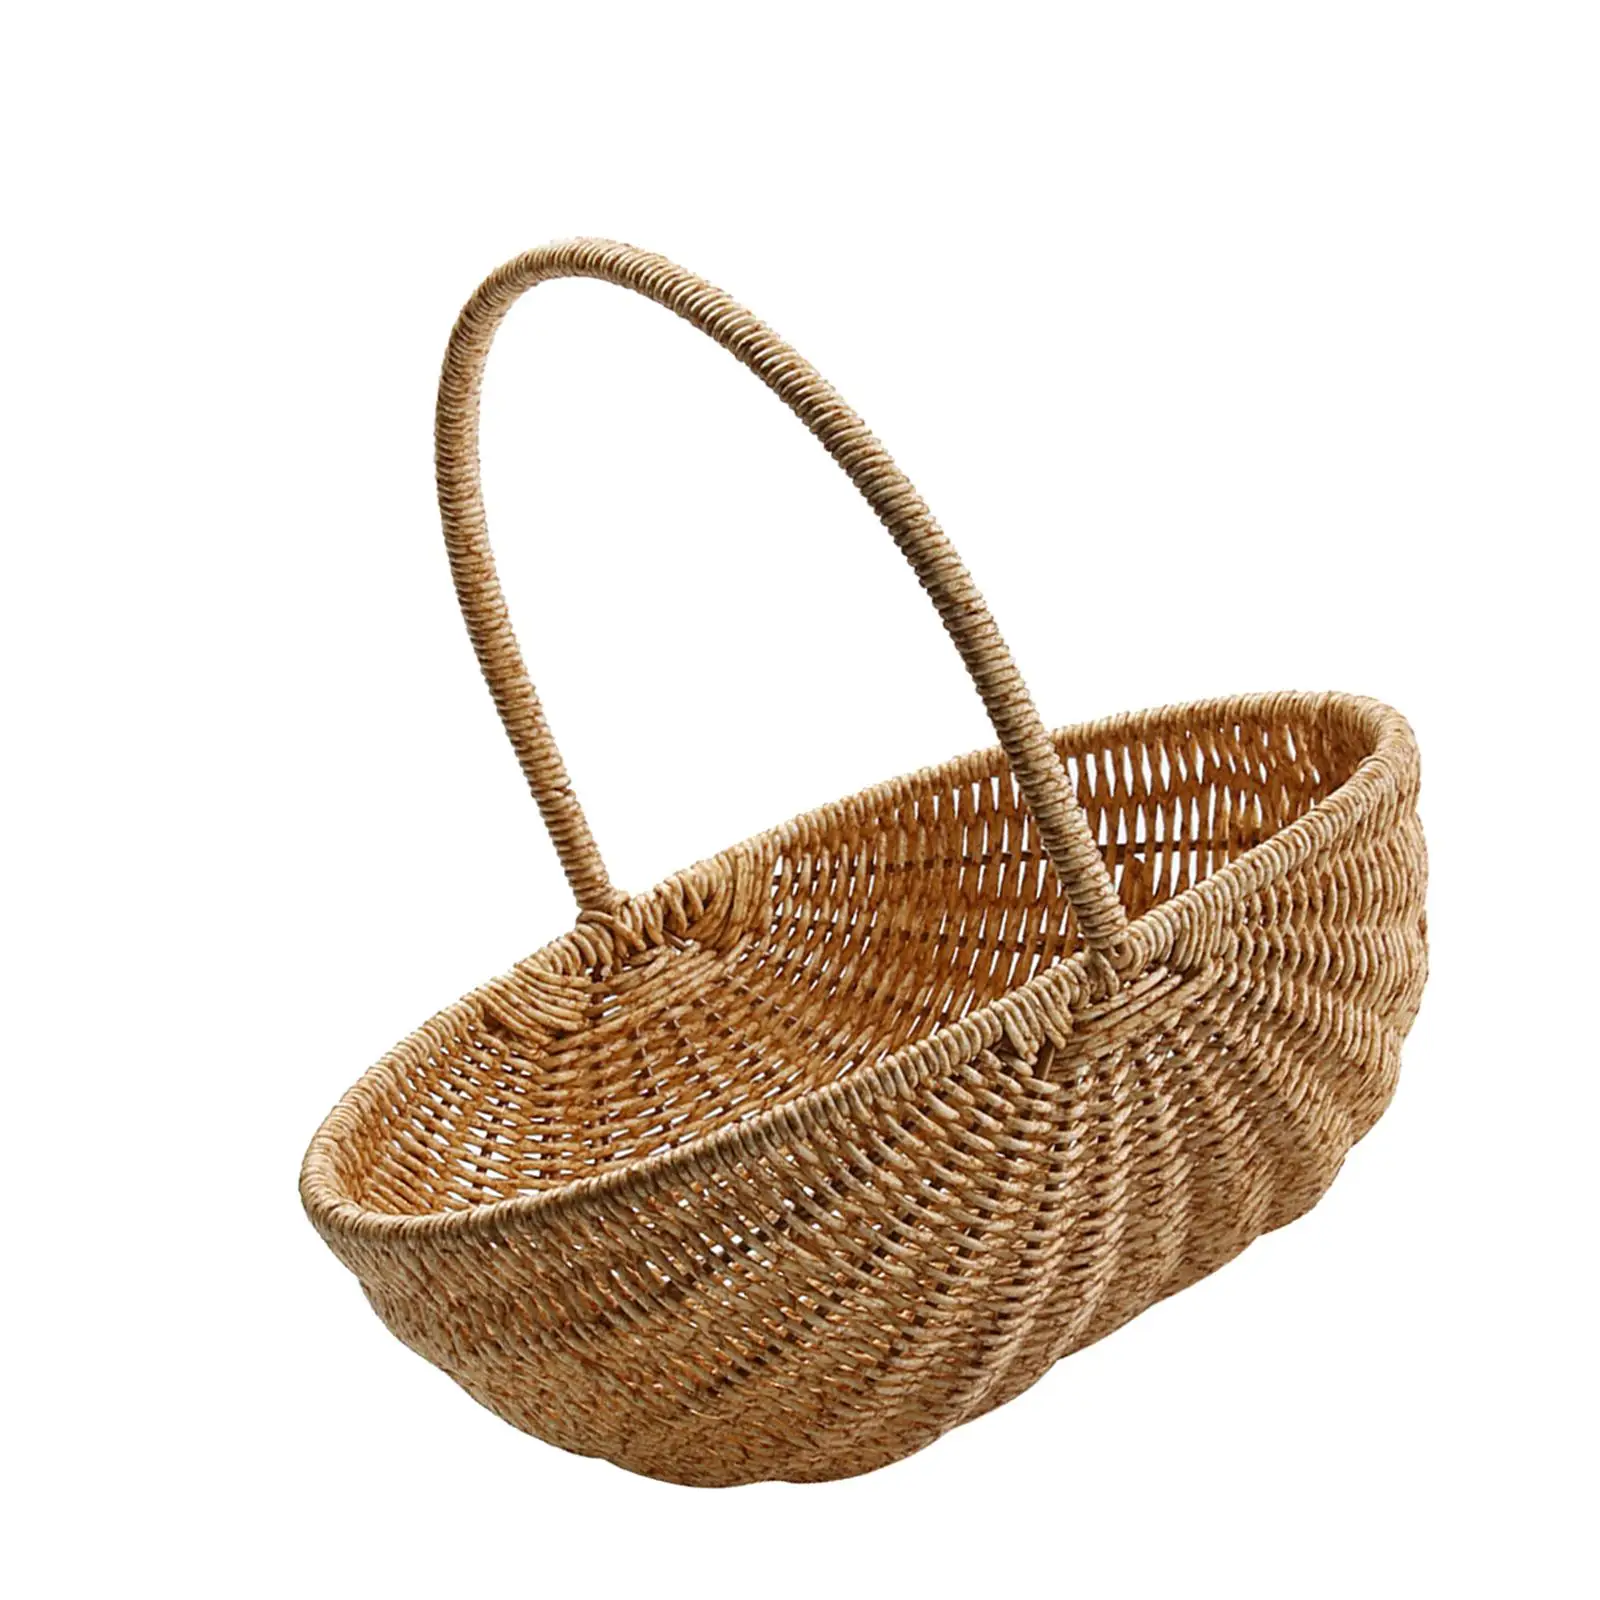 Multipurpose Woven Basket with Handle Rattan Decoration Storage Large Woven Organizer for Picnic Closet Bedroom Pantry Bathroom